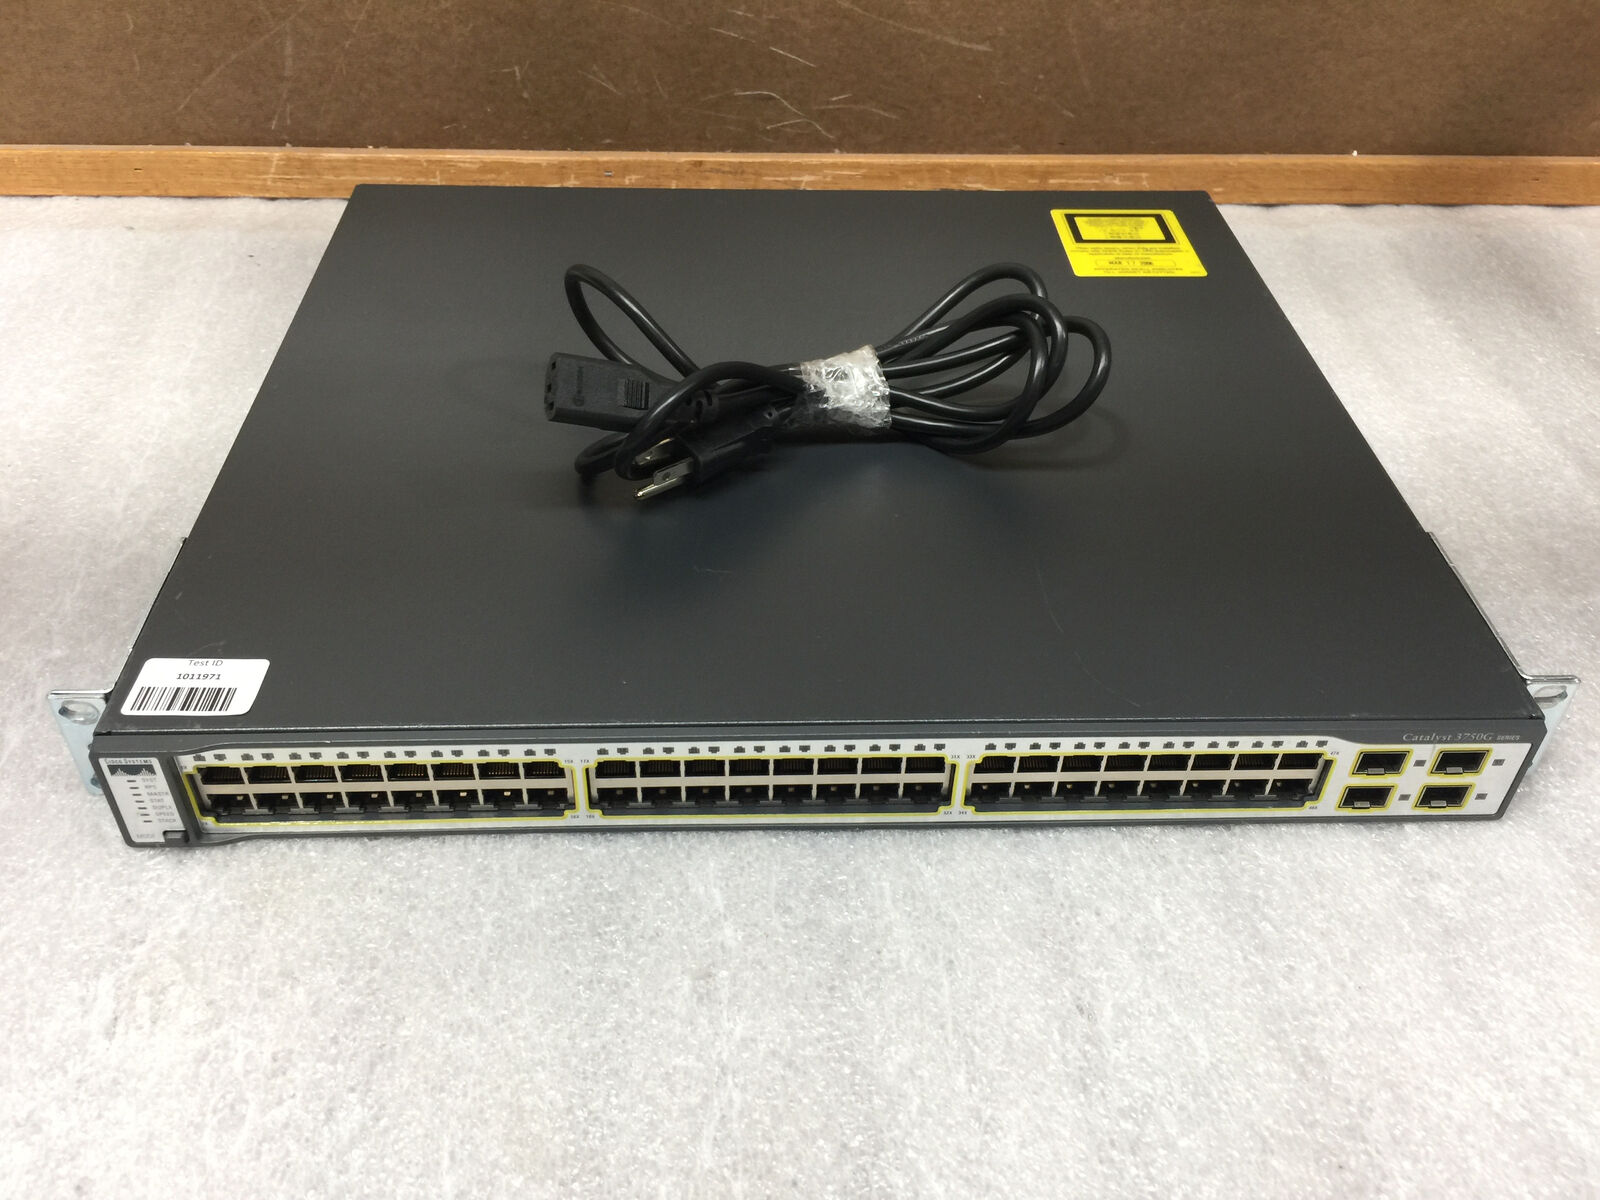 Cisco Catalyst WS-C3750G-48TS-S 48-Port Managed Gigabit Ethernet Switch - TESTED